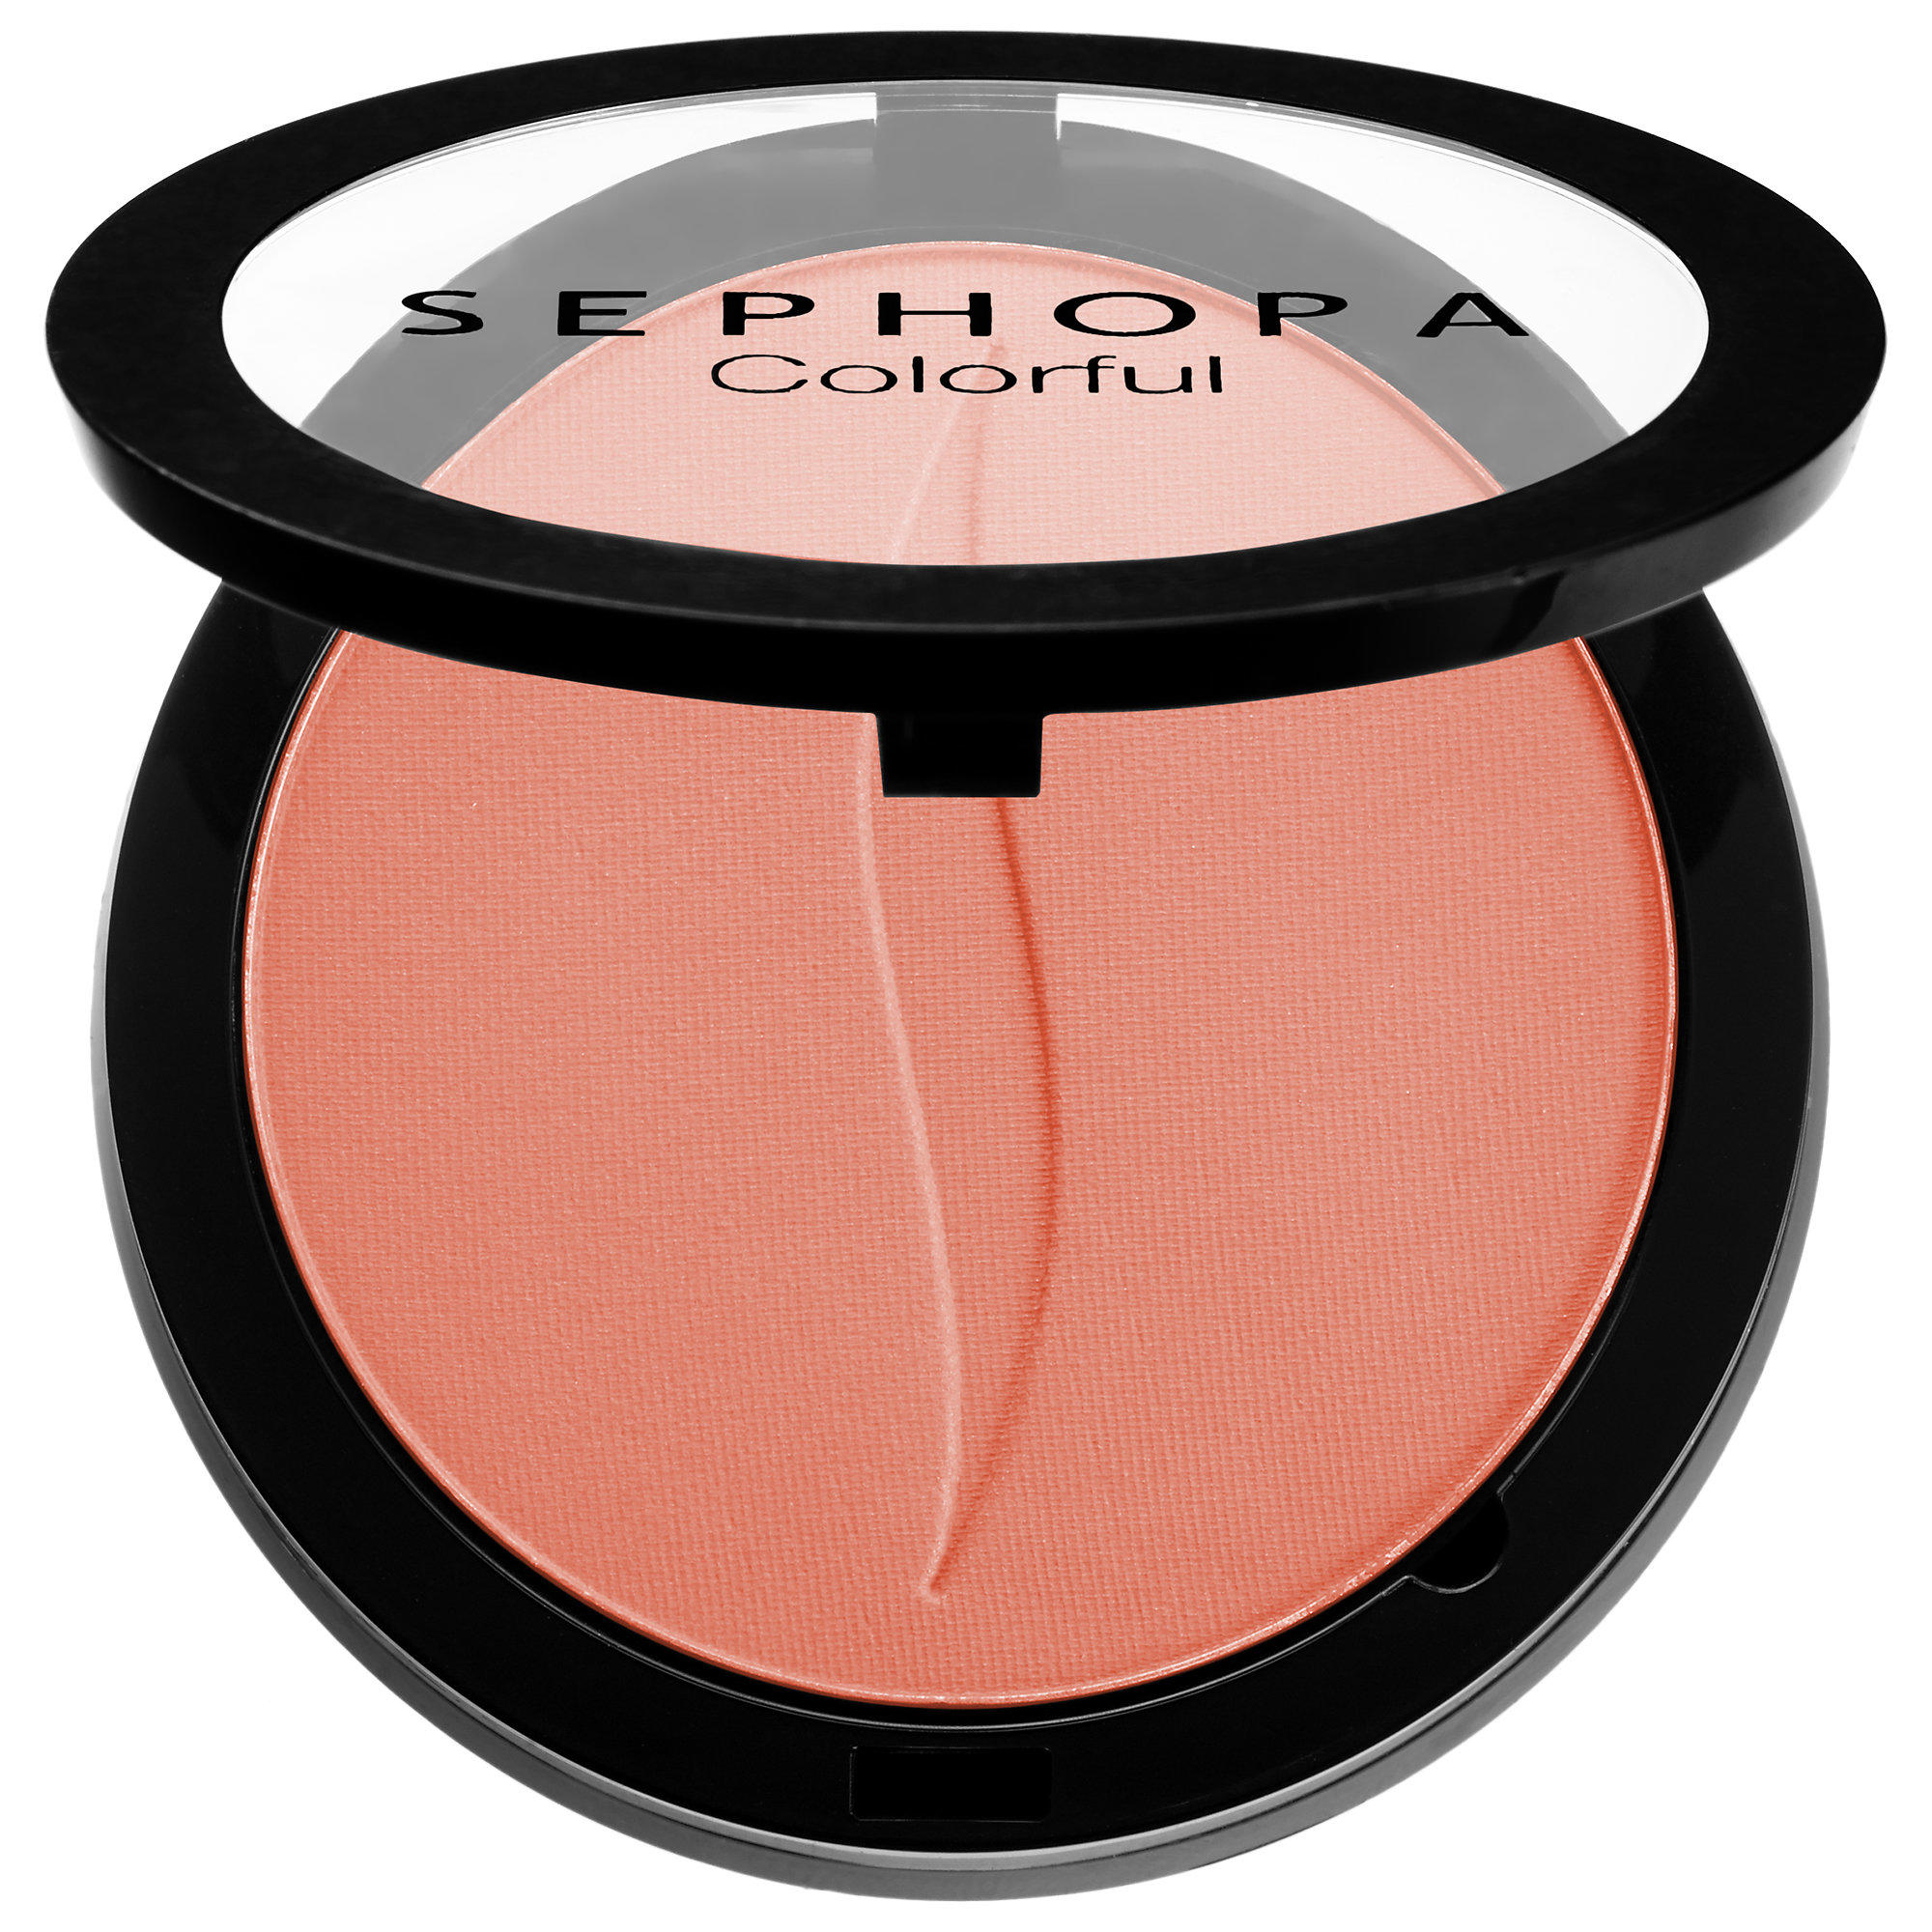 Sephora Colorful Face Powders Blush Sweet On You! No. 05